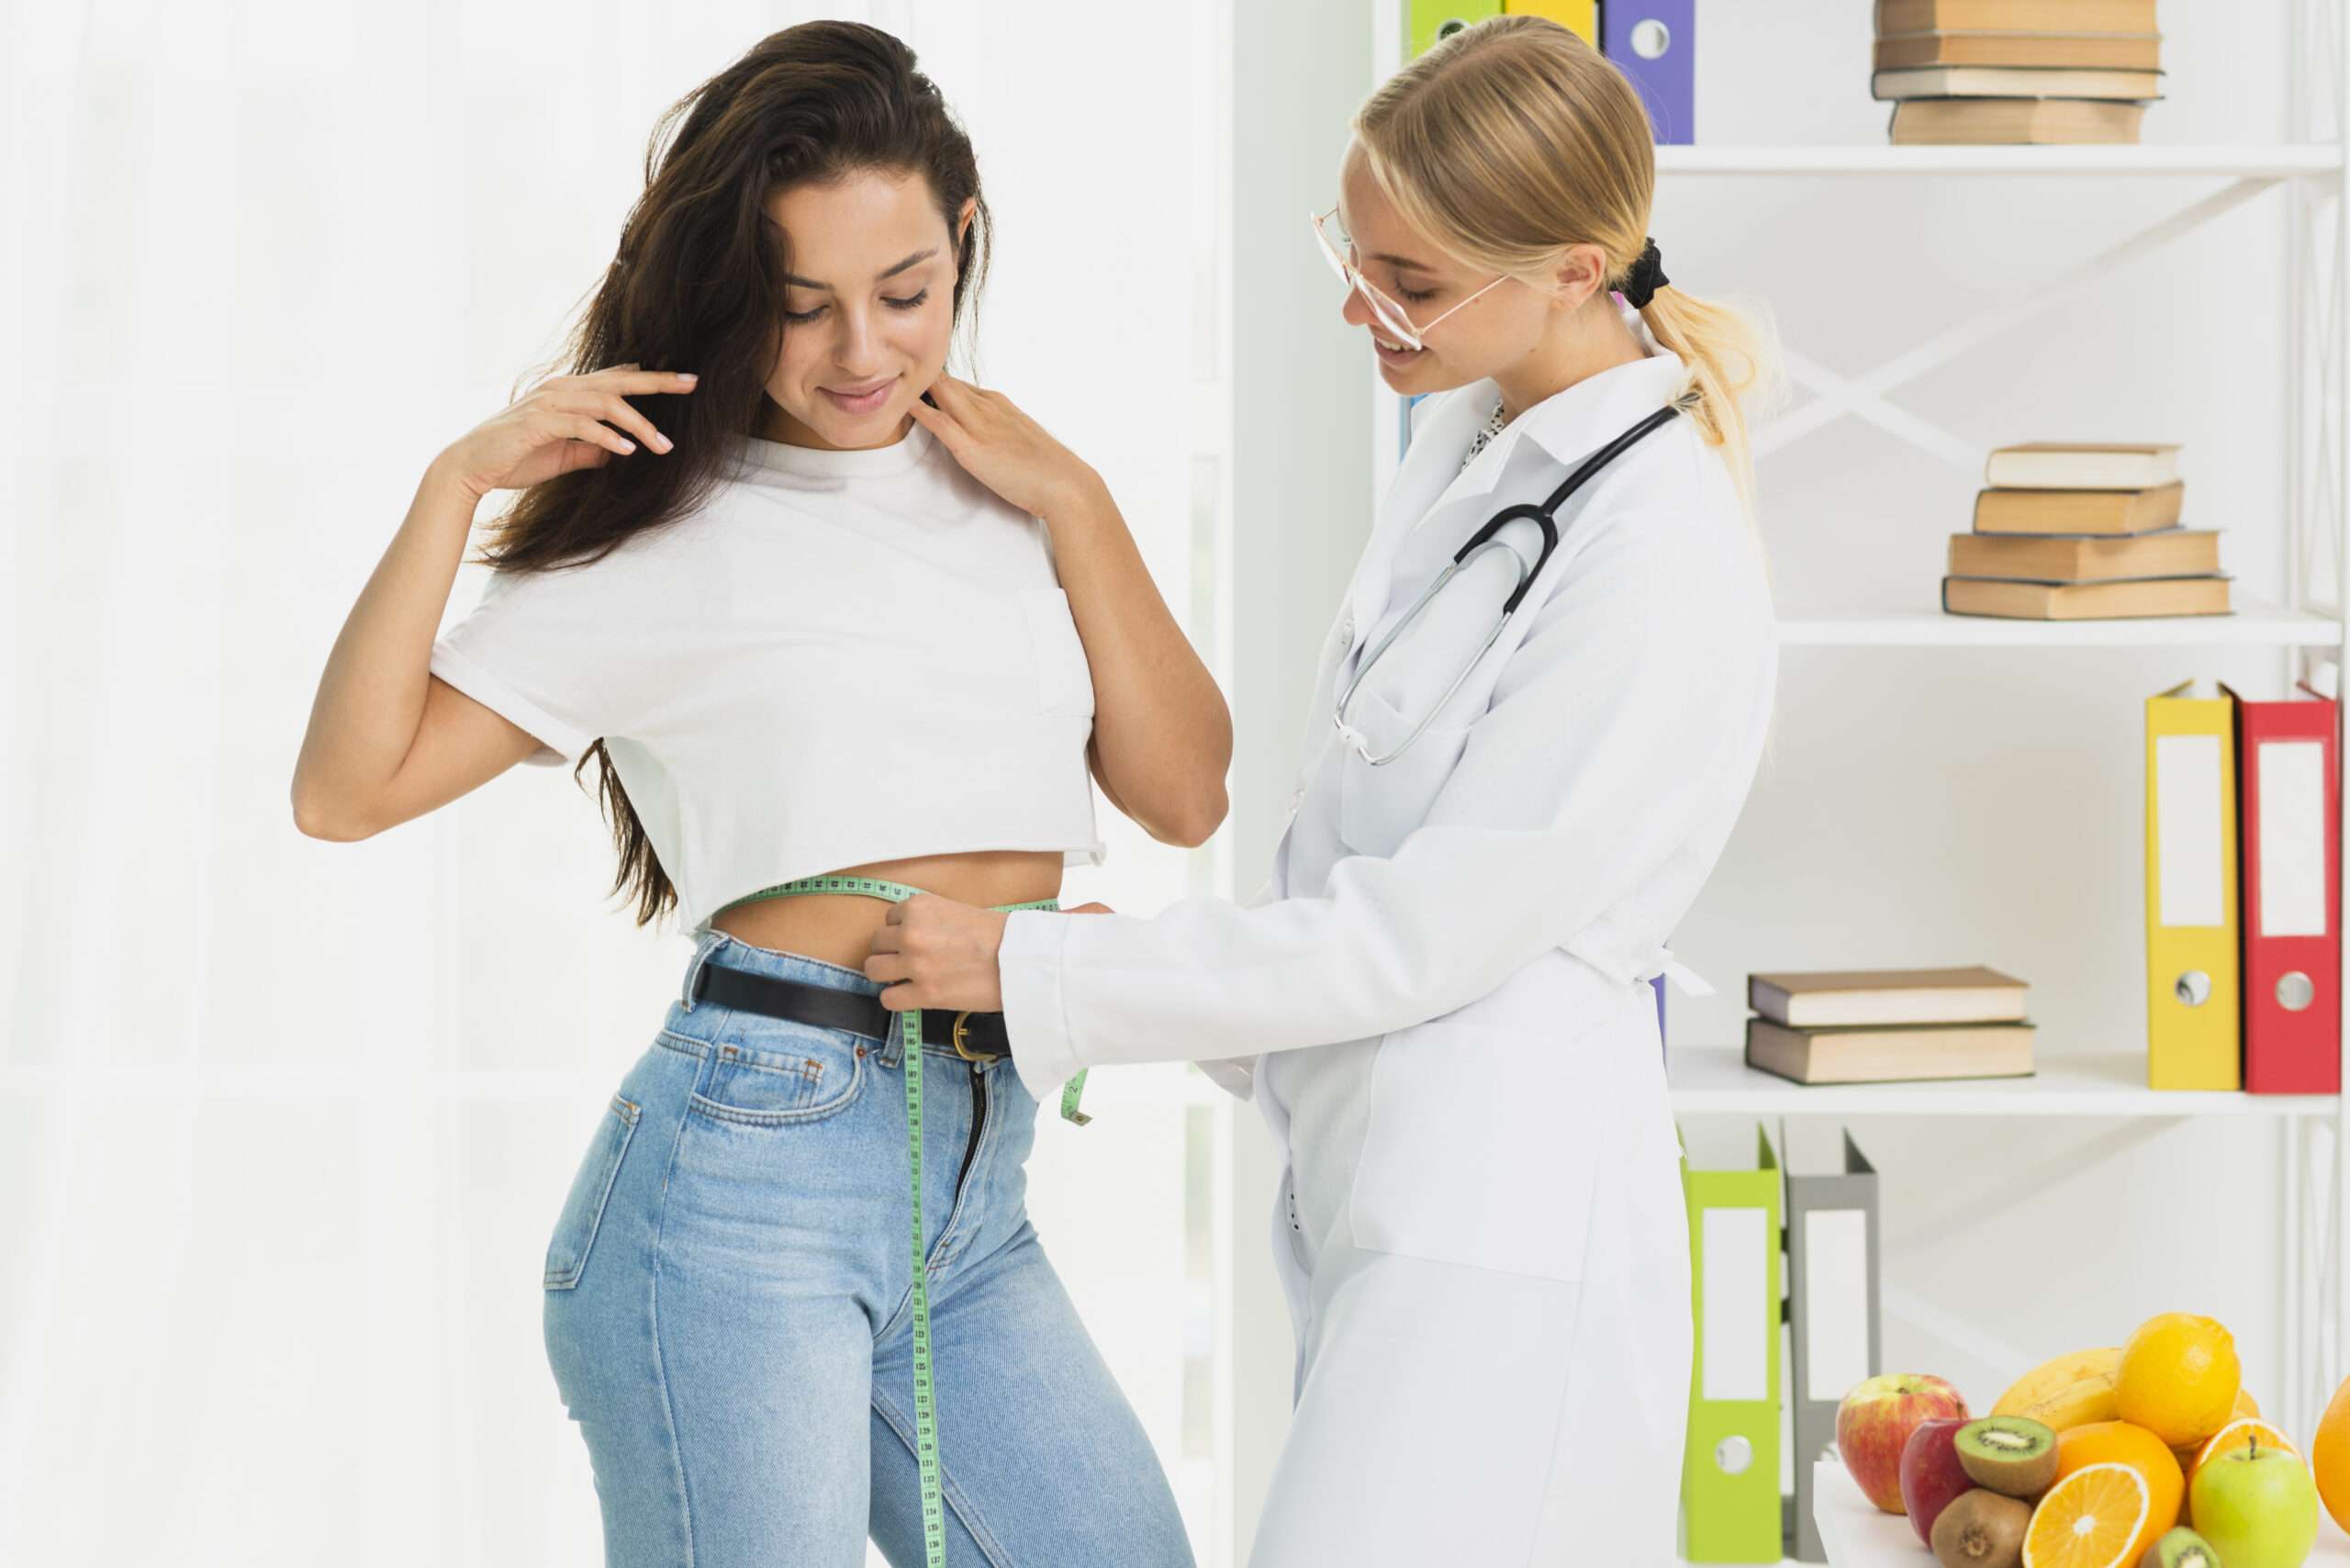 How a Medspa Can Help With Weight Loss